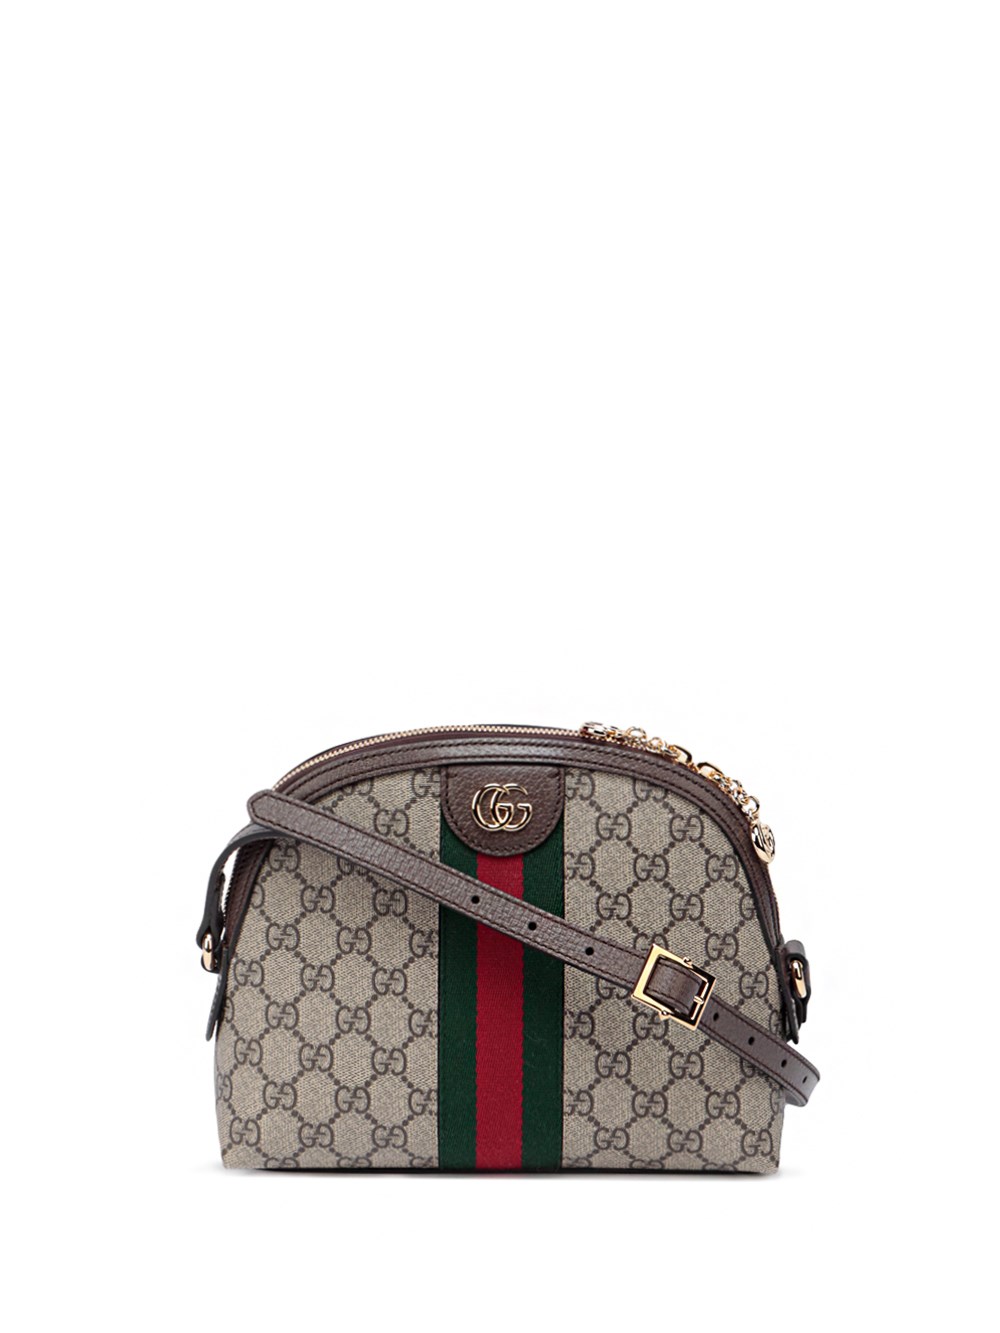 GUCCI `OPHIDIA GG` SMALL SHOULDER BAG